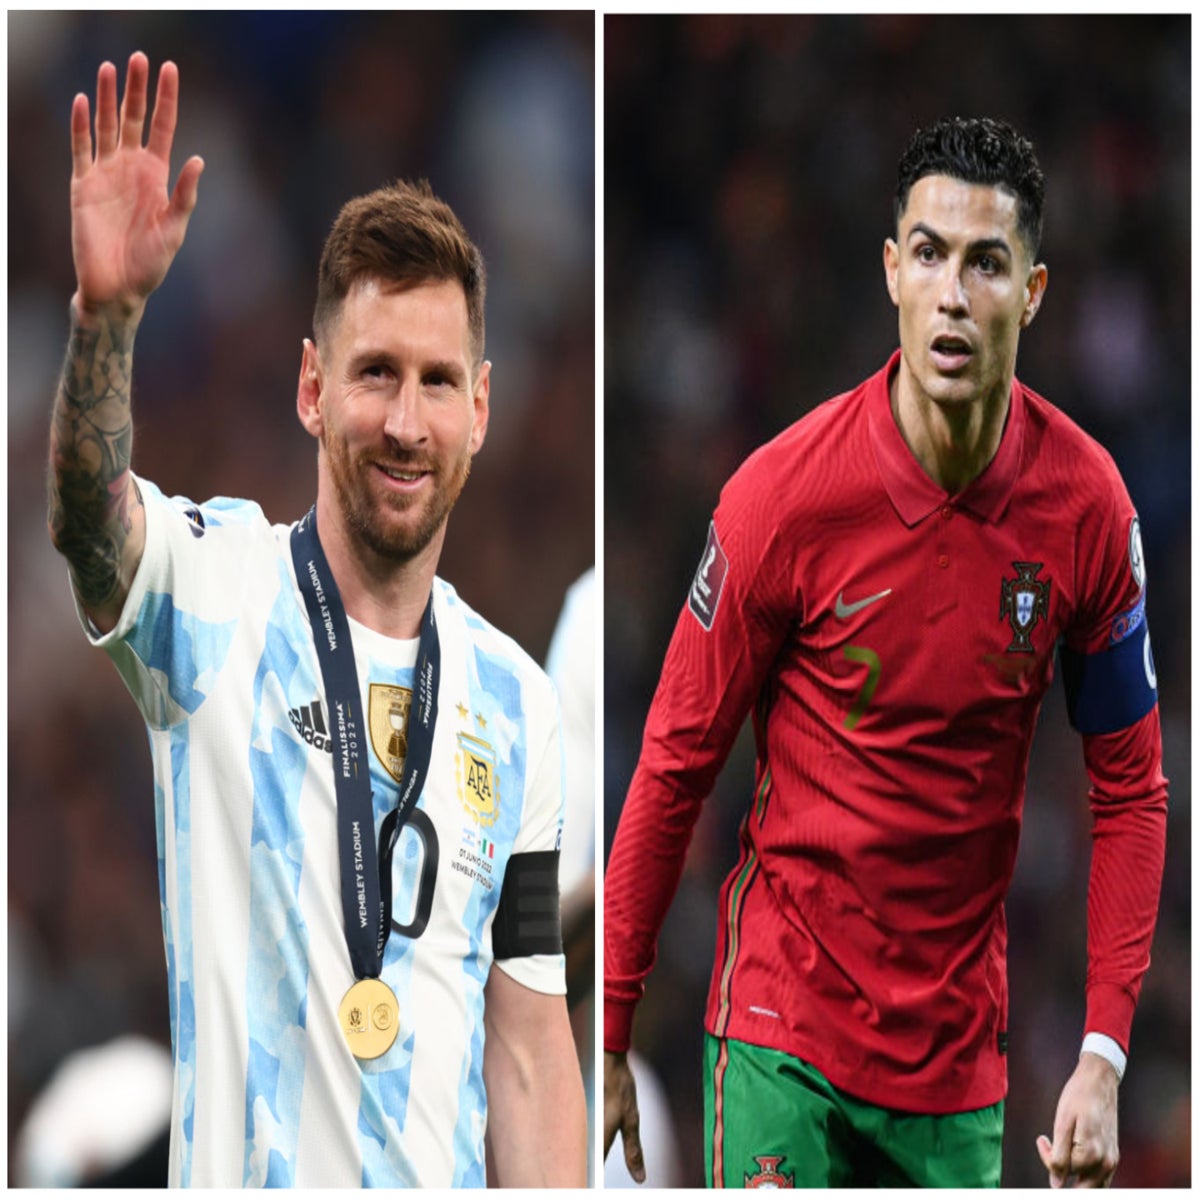 If we played together I would pass the ball to Ronaldo: Messi